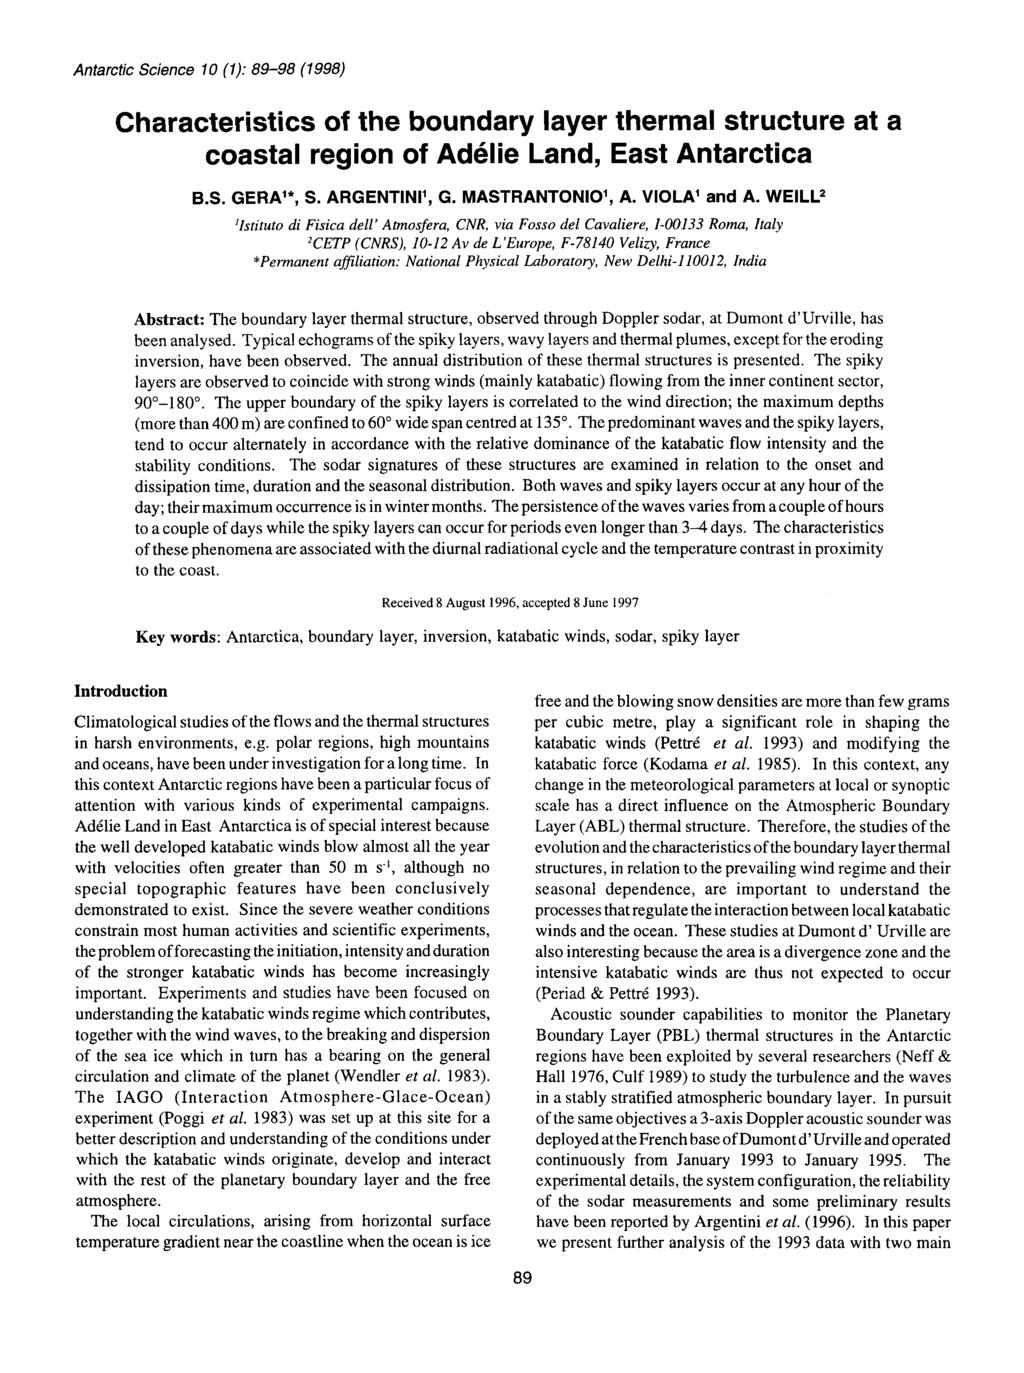 Antarctic Science 10 (1): 89-98 (1998) Characteristics of the boundary layer thermal structure at a coastal region of Adelie Land, East Antarctica B.S. GERA1*, S. ARGENTINI1, G. MASTRANTONIO1, A.